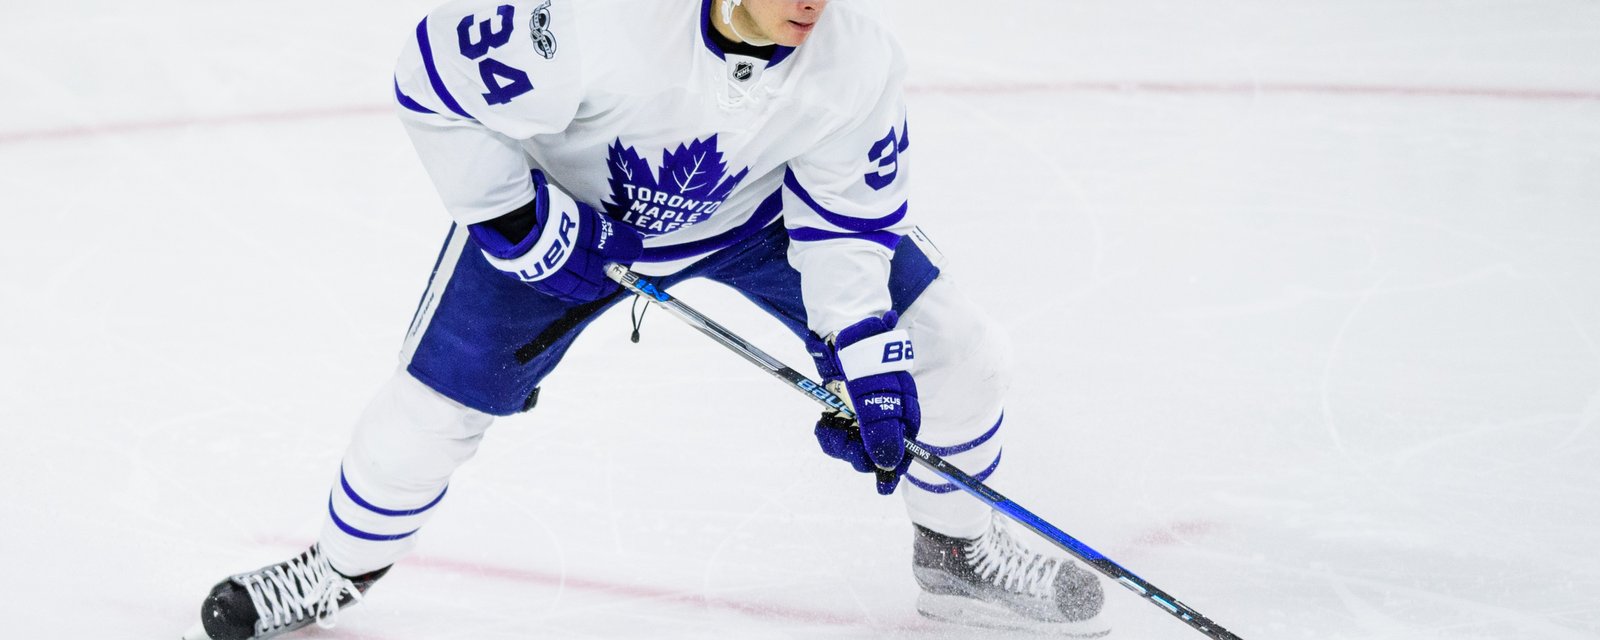 Does Auston Matthews have the best shot in the NHL?